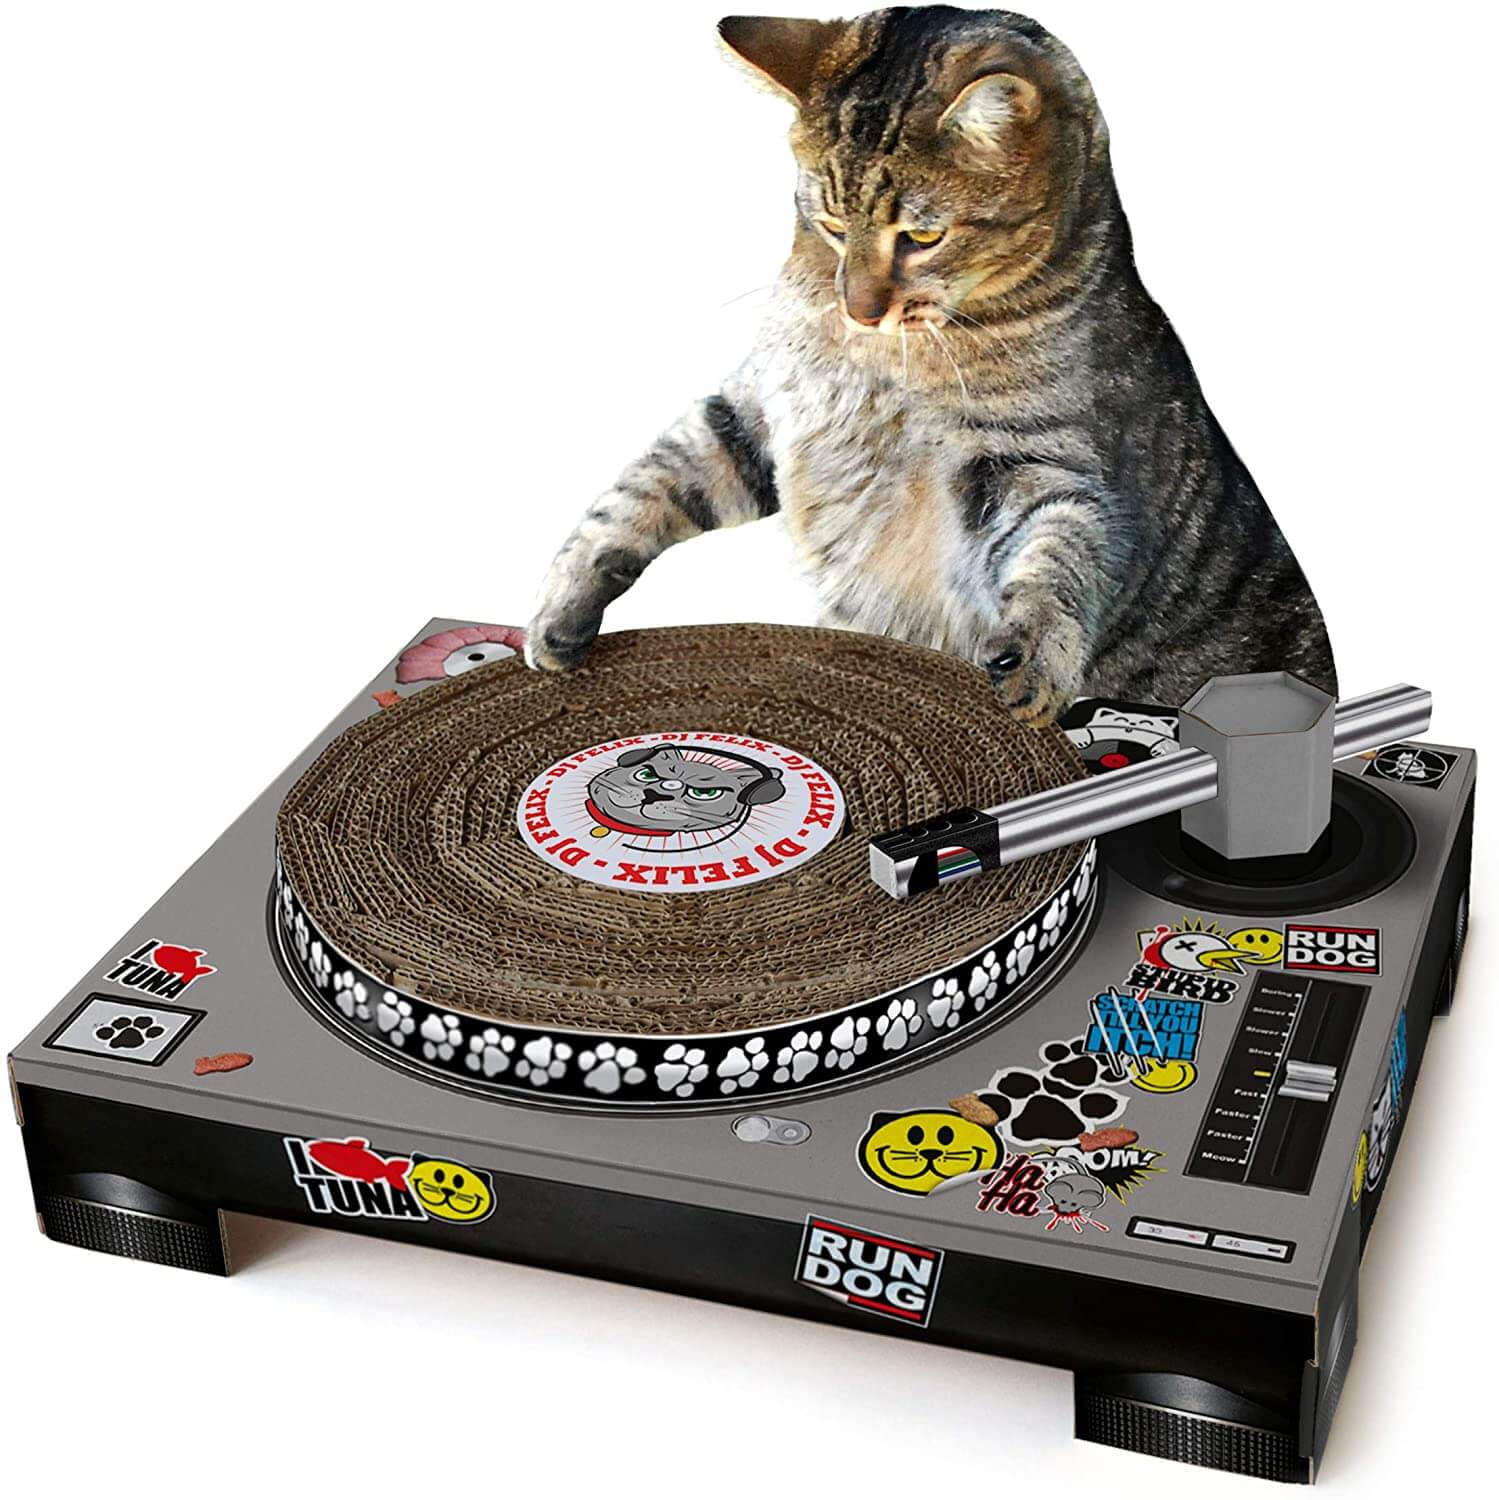 Turntable scratching post